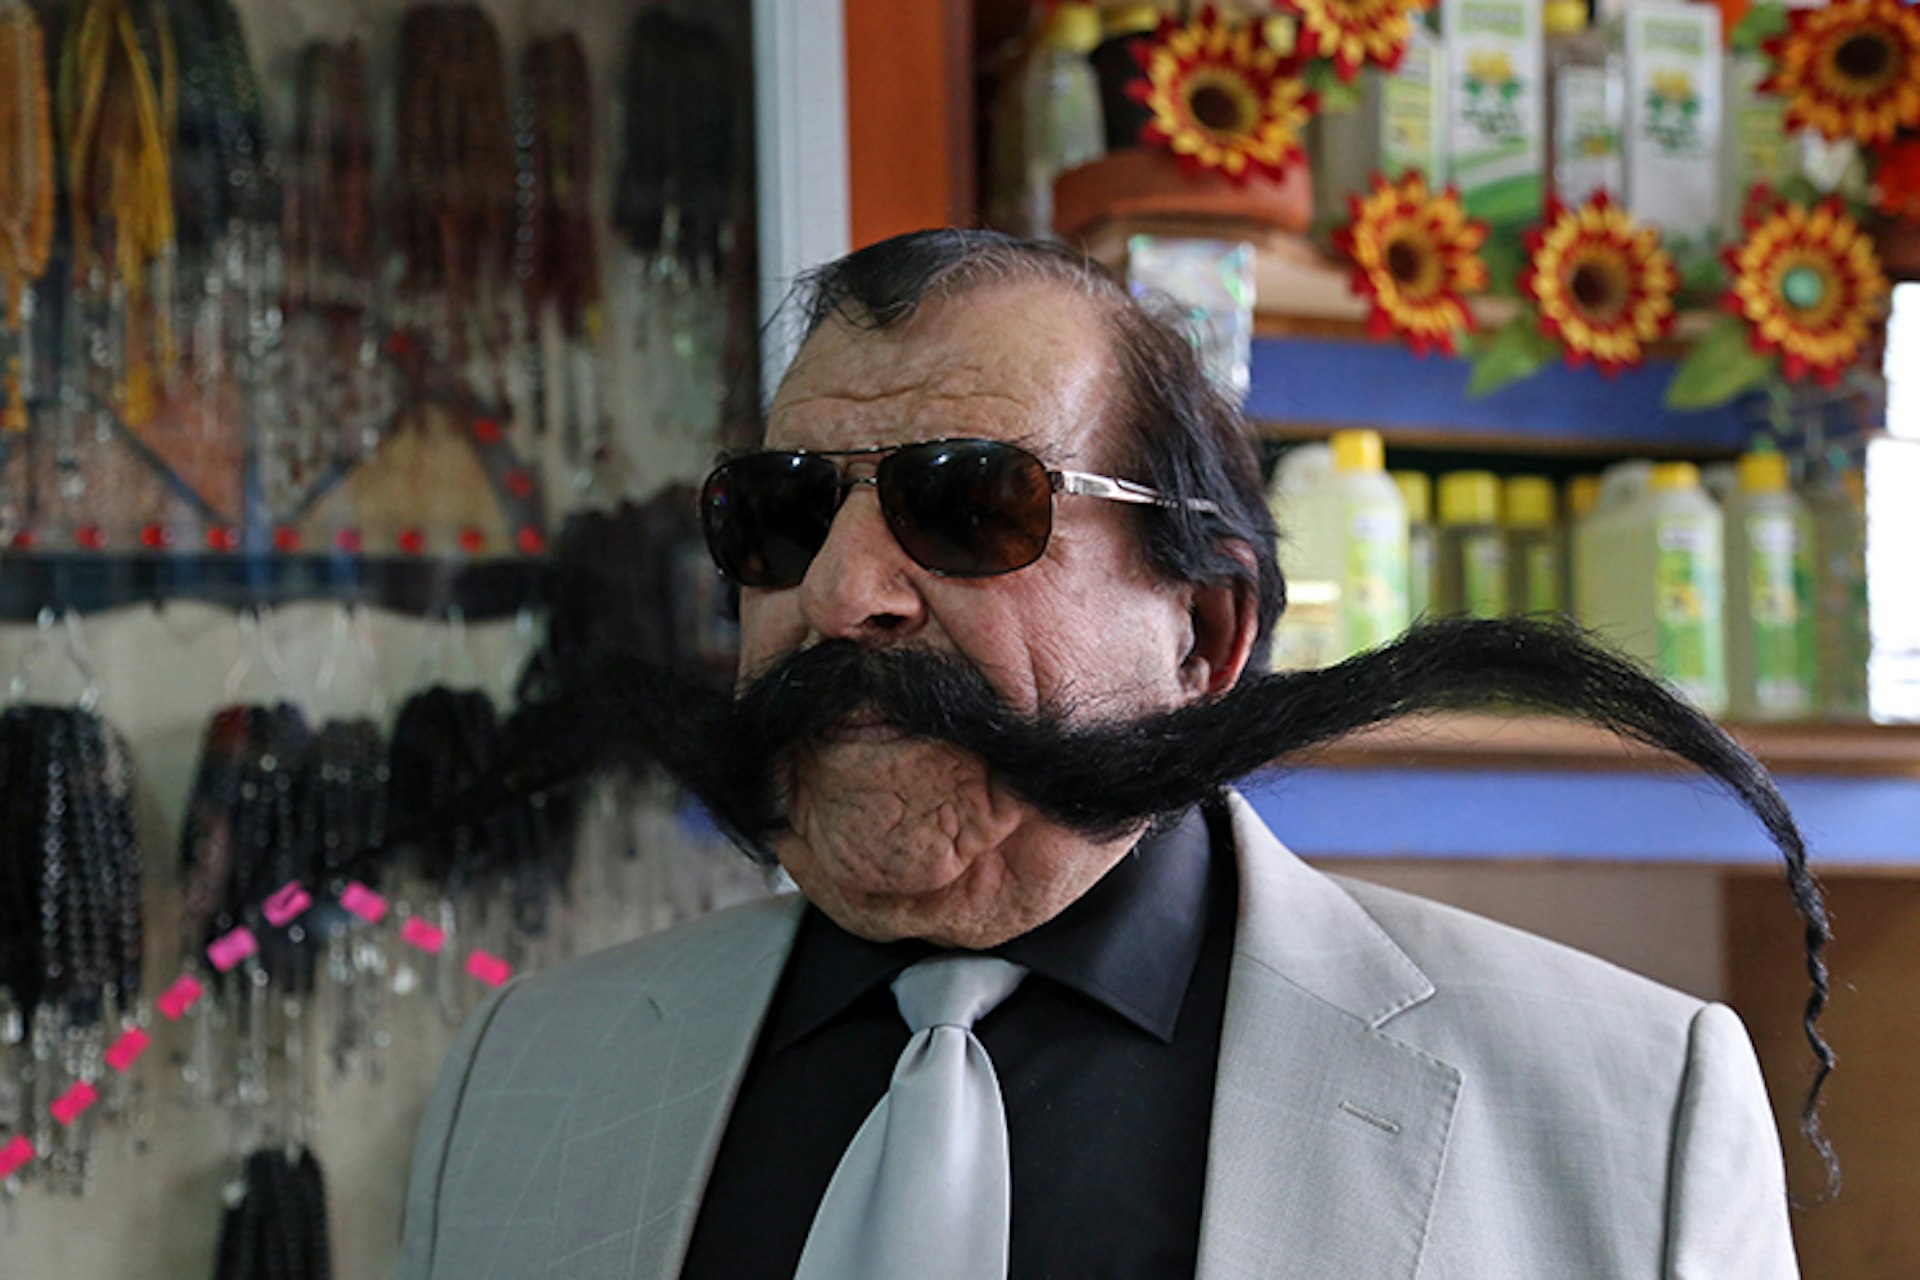 Turkish hairdresser Haci Kilic of Turkey poses with his 1.5 meter long mustache